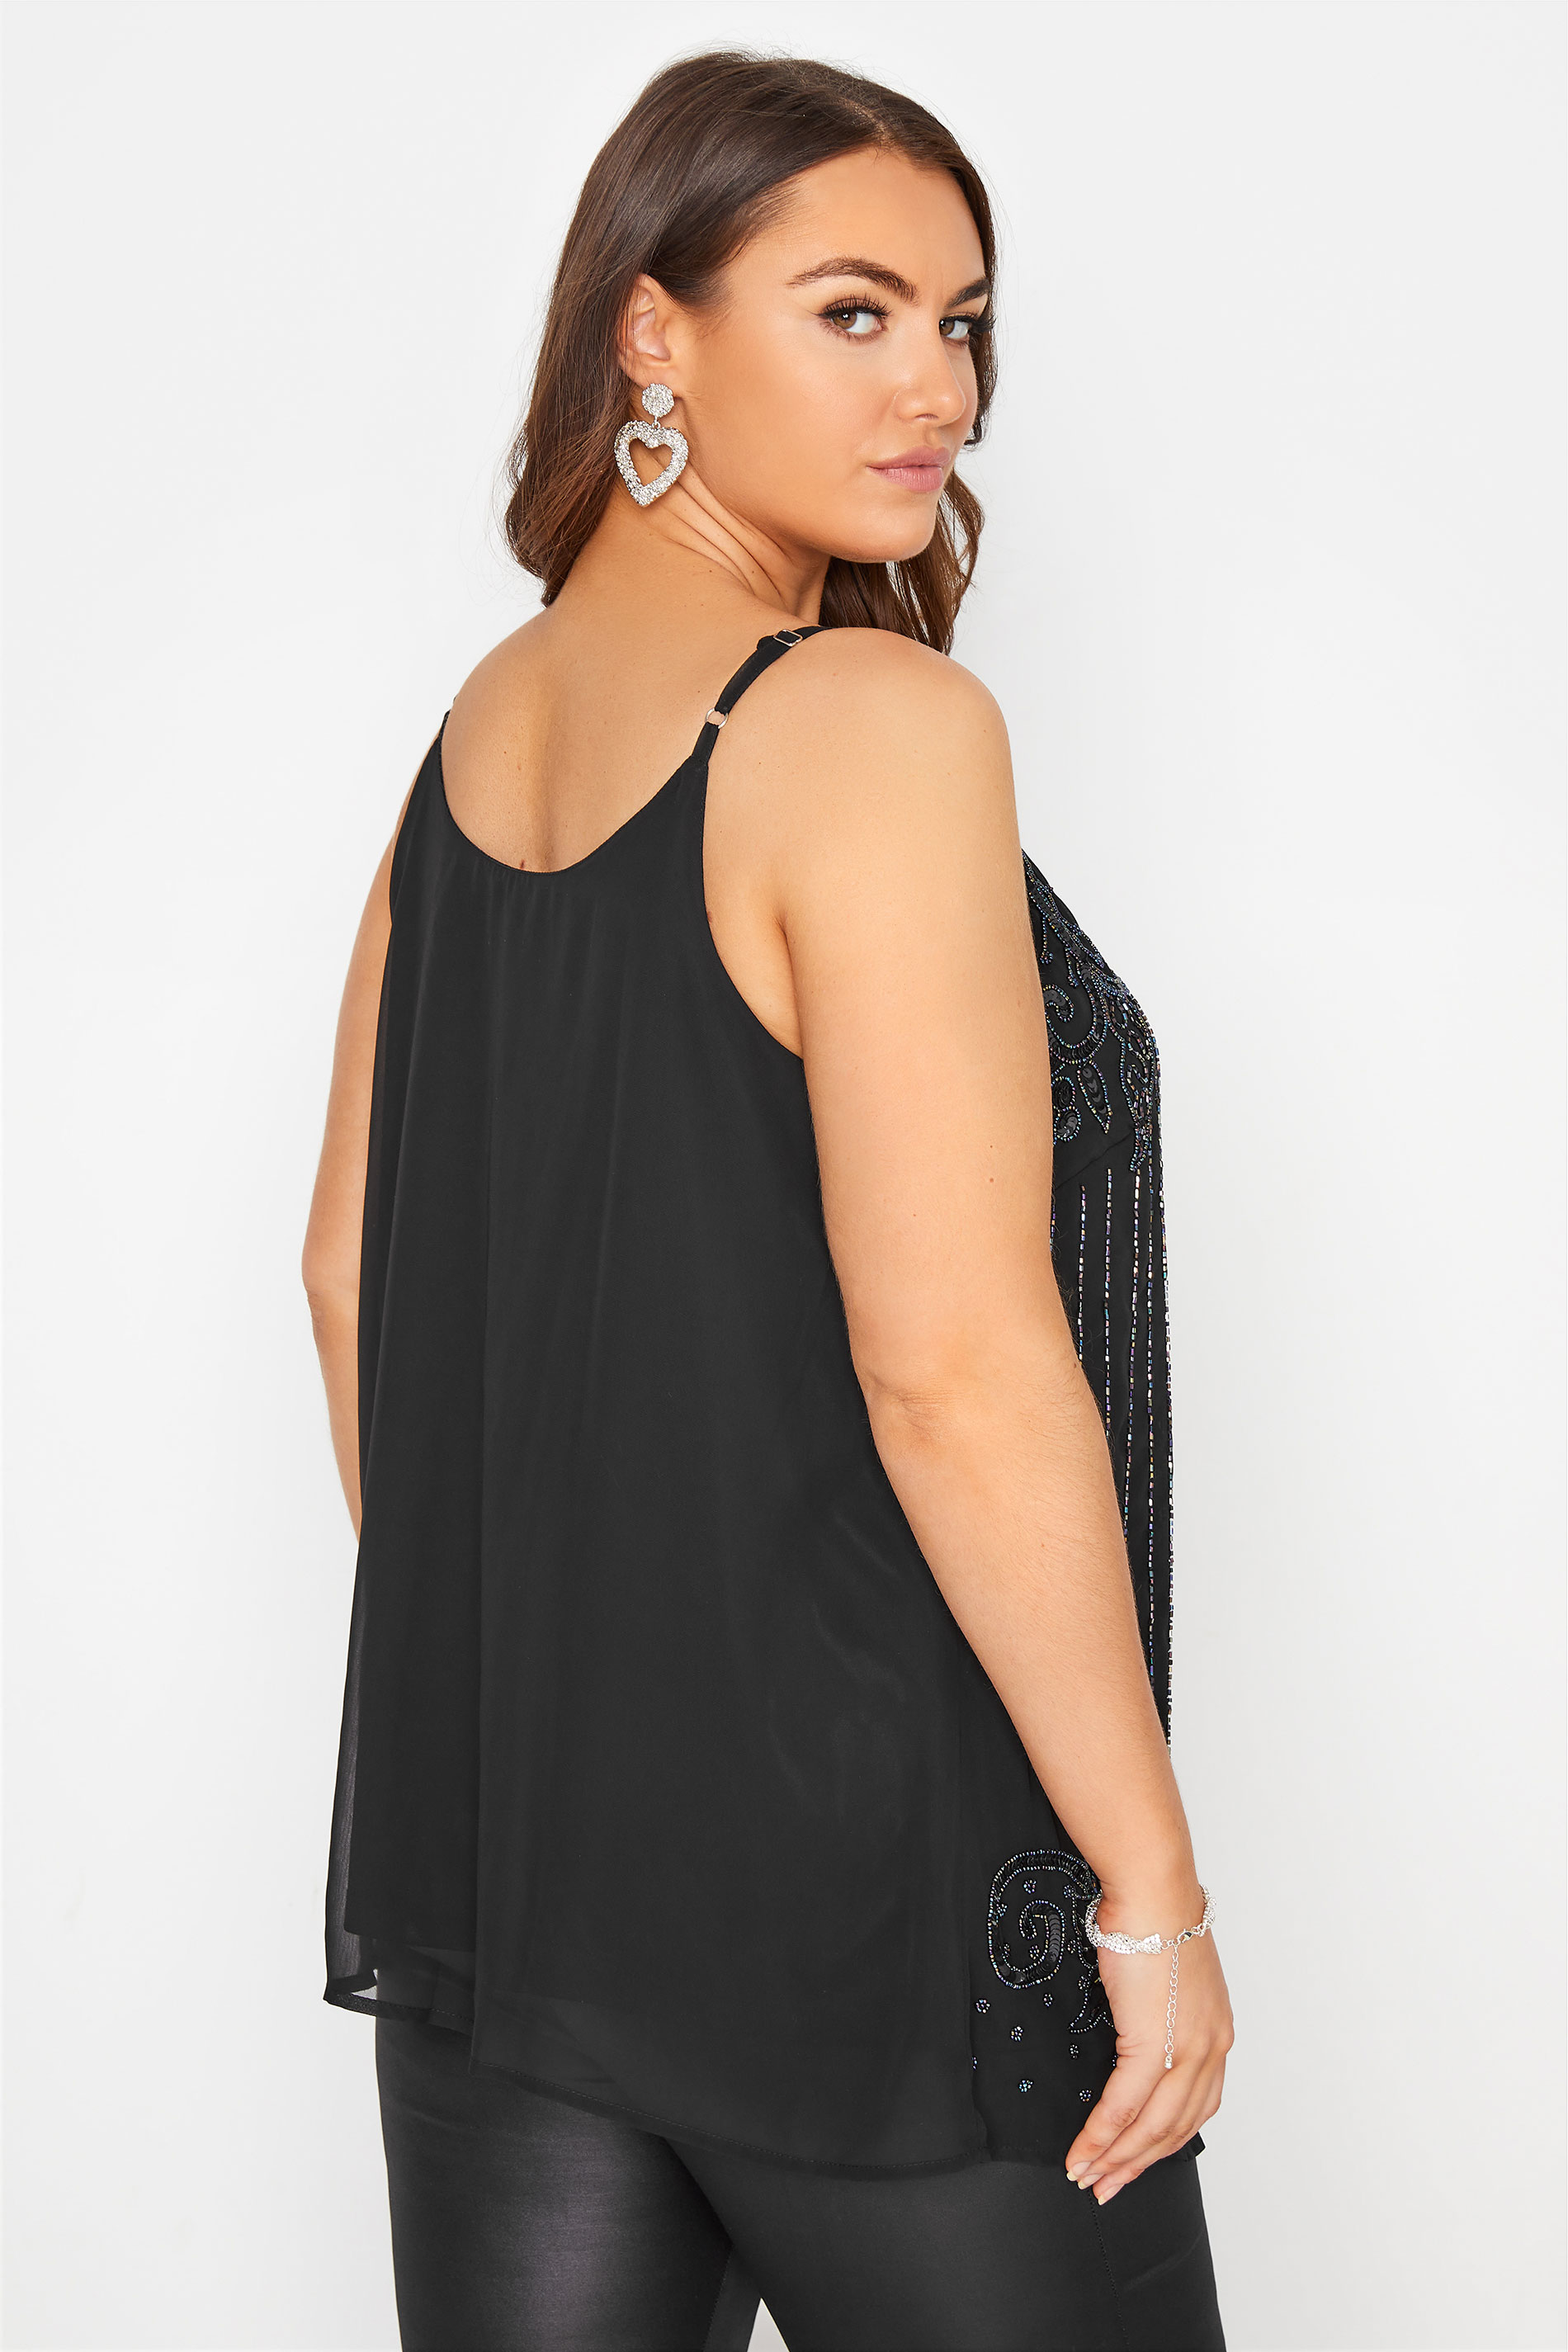 Plus Size LUXE Black Sequin Hand Embellished Cami Top | Yours Clothing 3